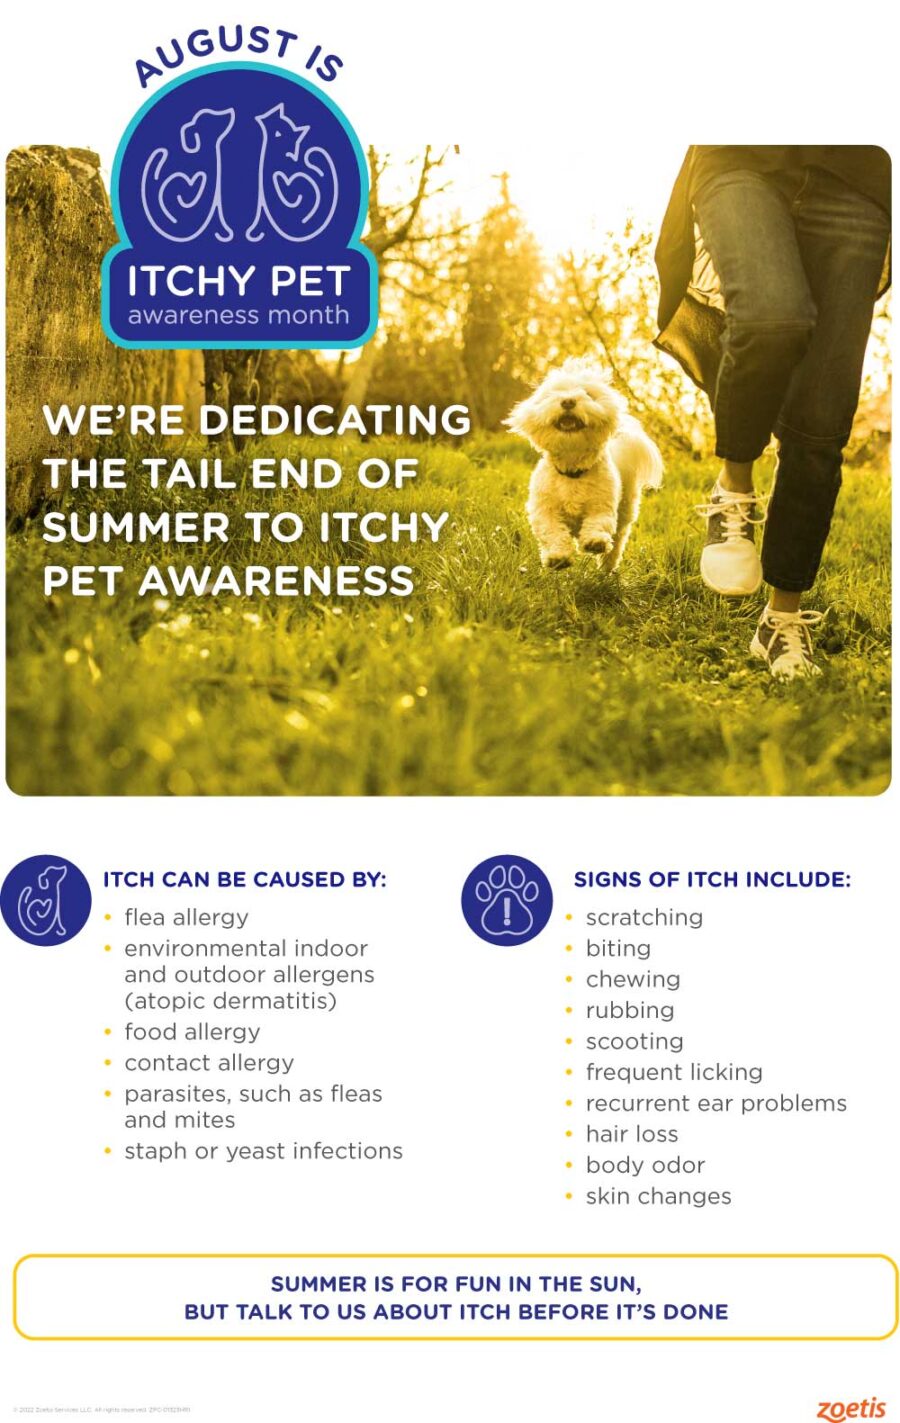 August is Itchy Pet Awareness Month